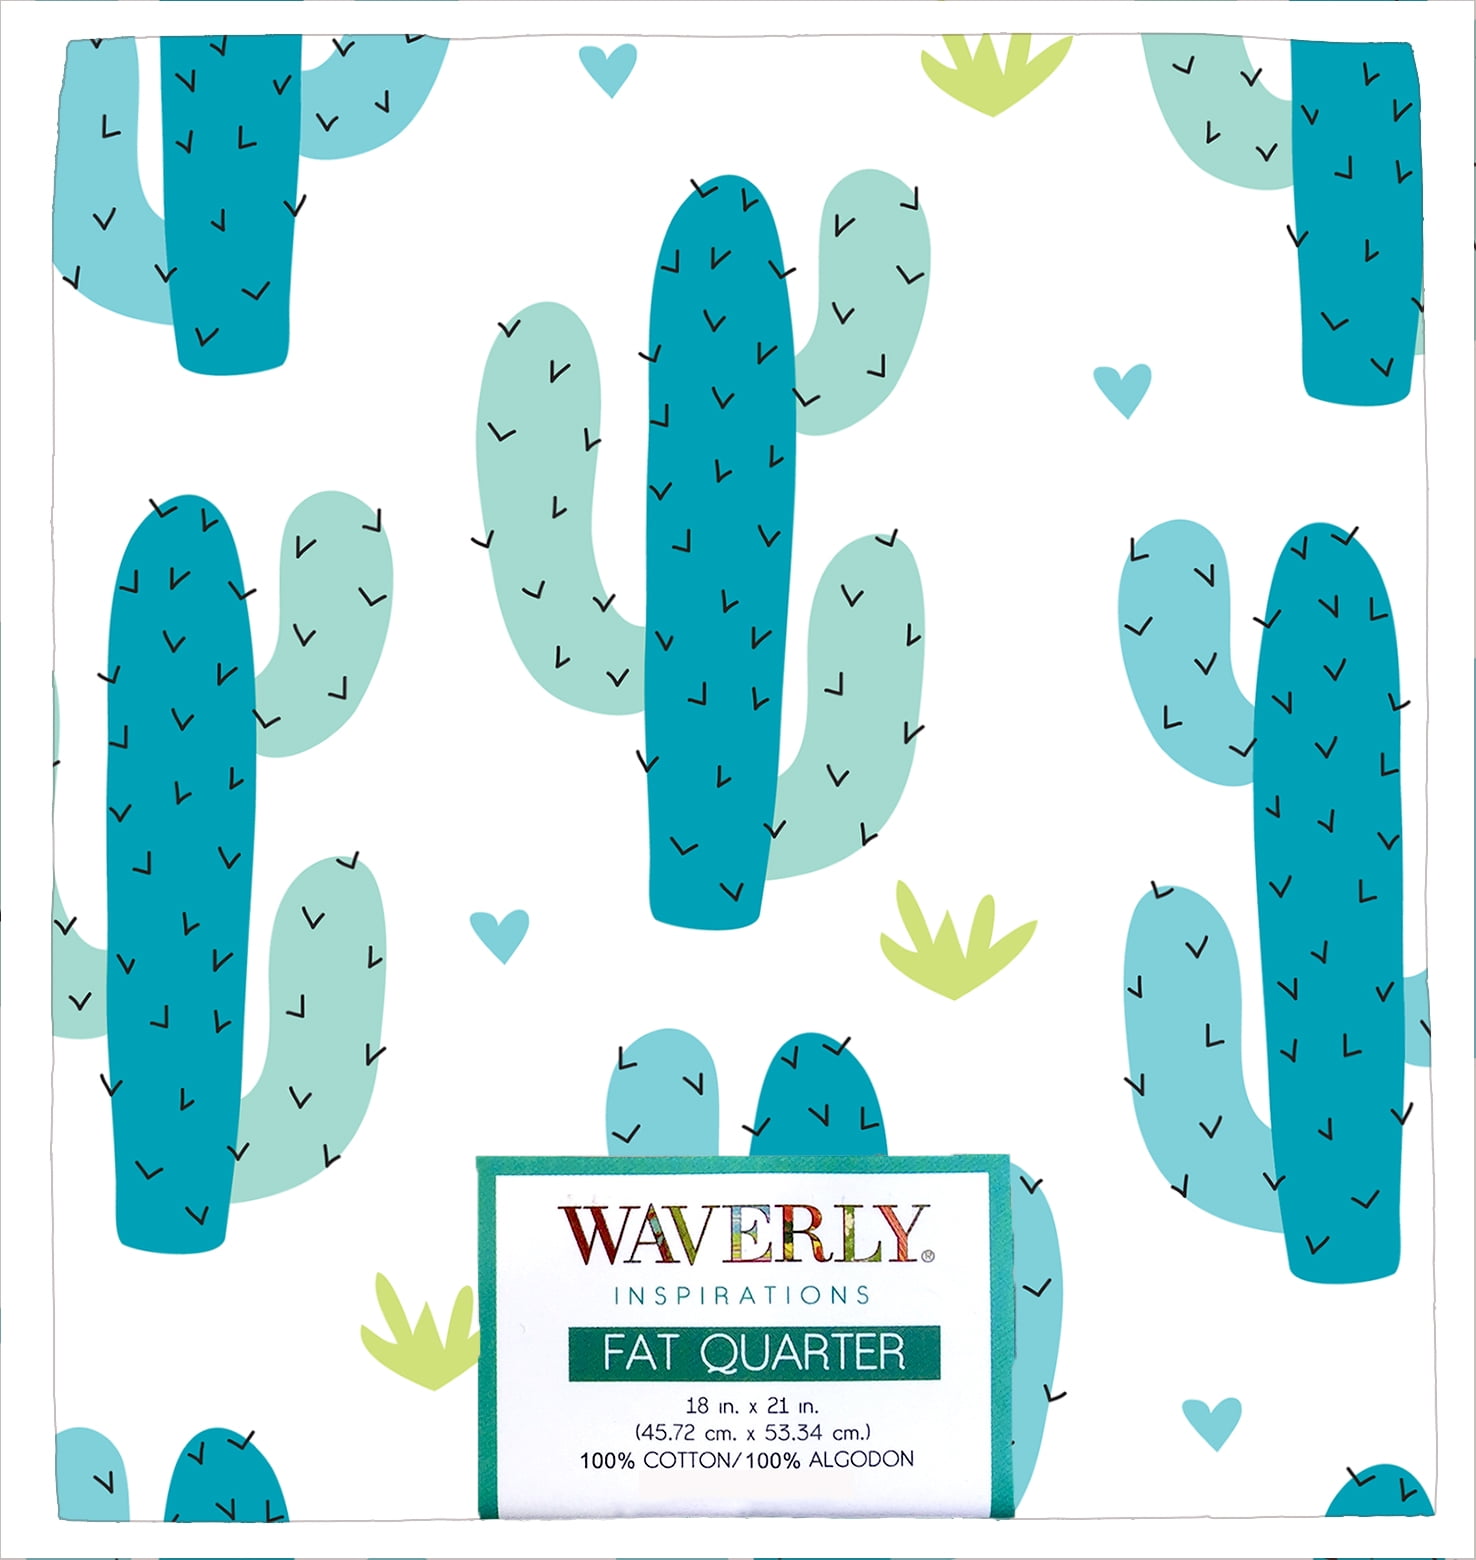 Waverly Inspirations 18" x 21" 100% Cotton Fat Quarter Cactus Teal Print Craft Quilting Fabric, 1 Each